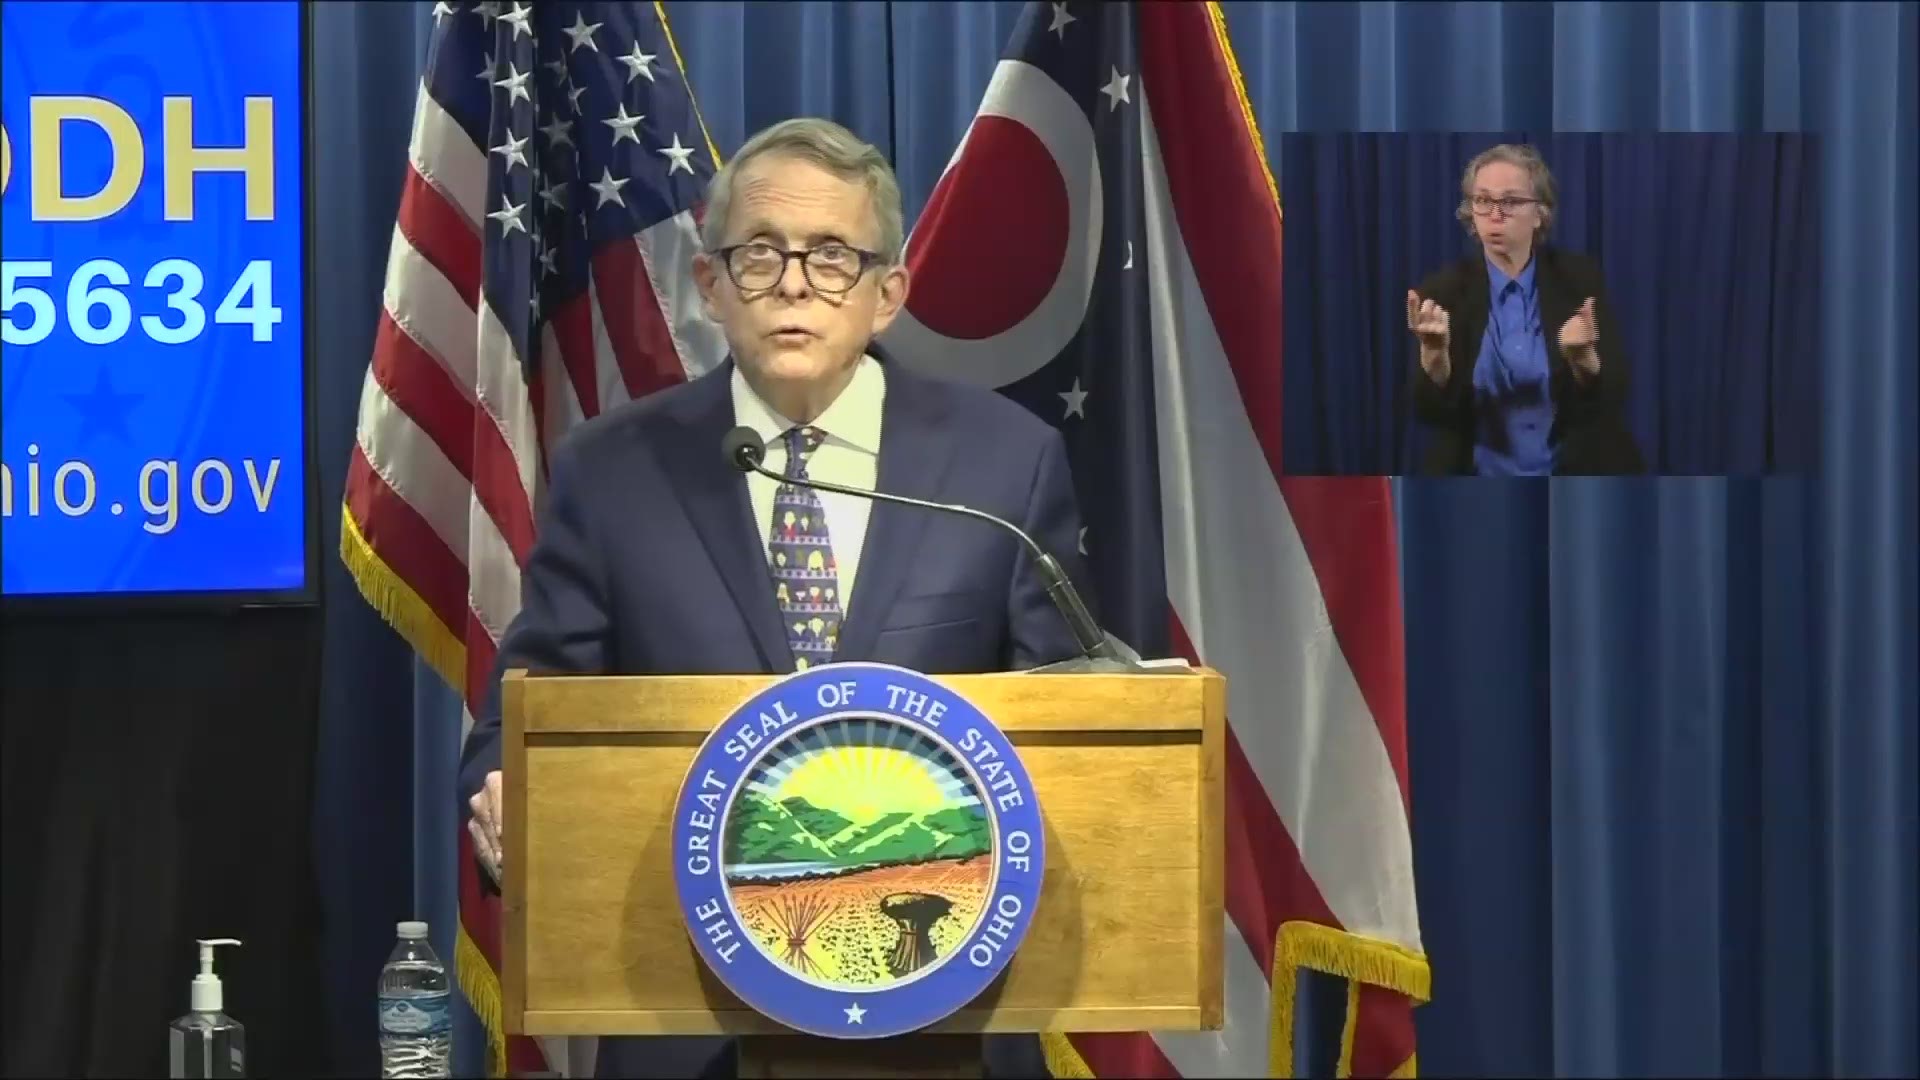 Staying Home.  Ohio Governor Mike DeWine announced on Monday that the state's K-12 schools will remain closed through the remainder of the current school year.